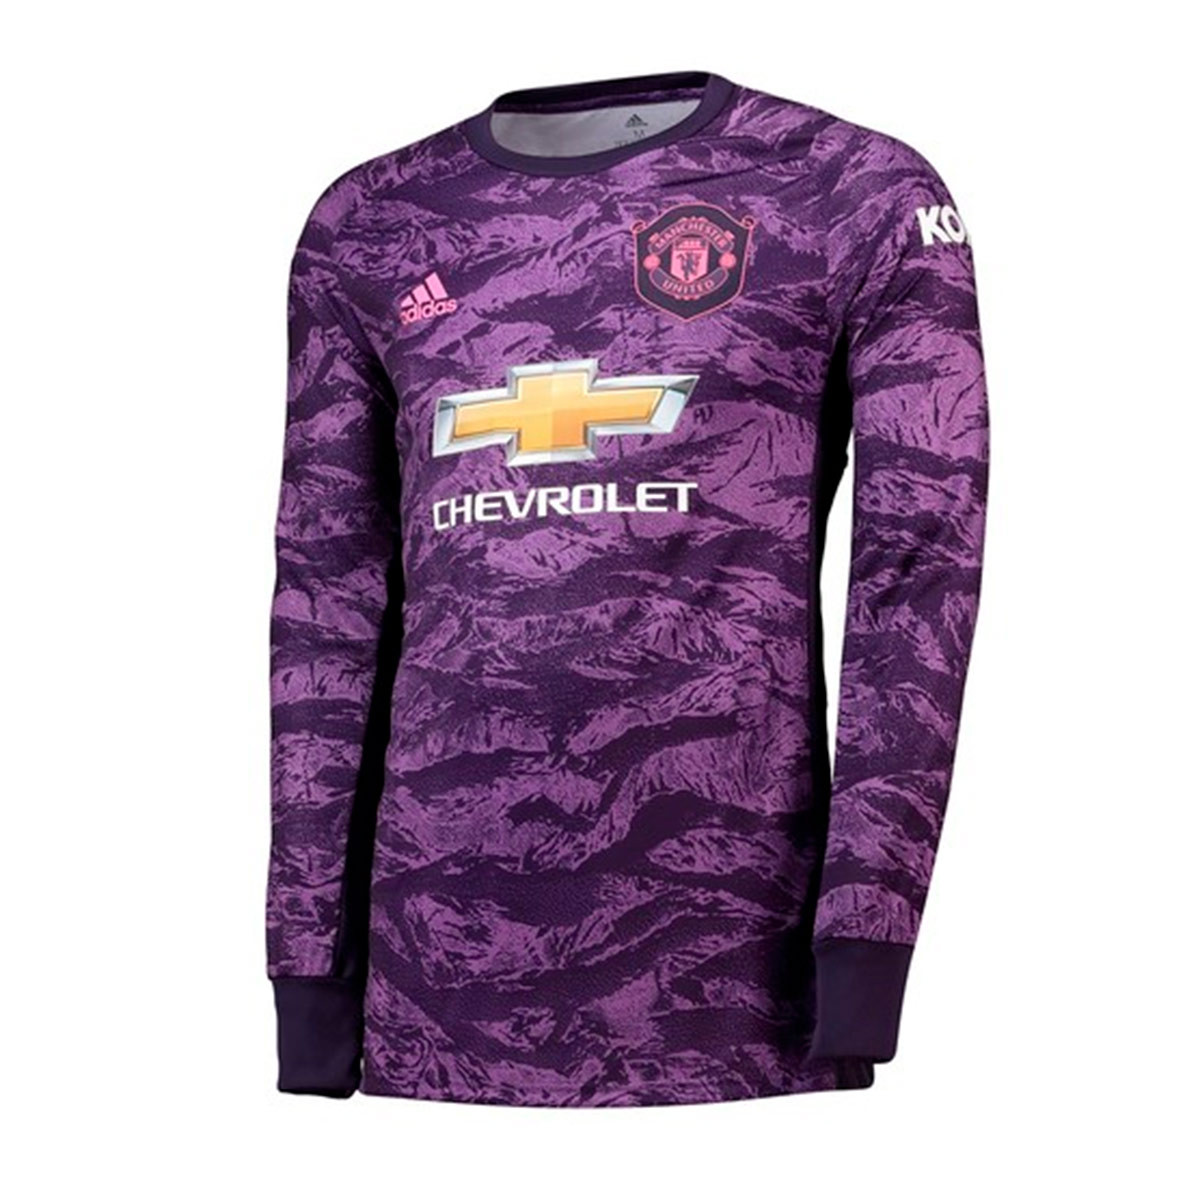 new manchester united jersey 2019